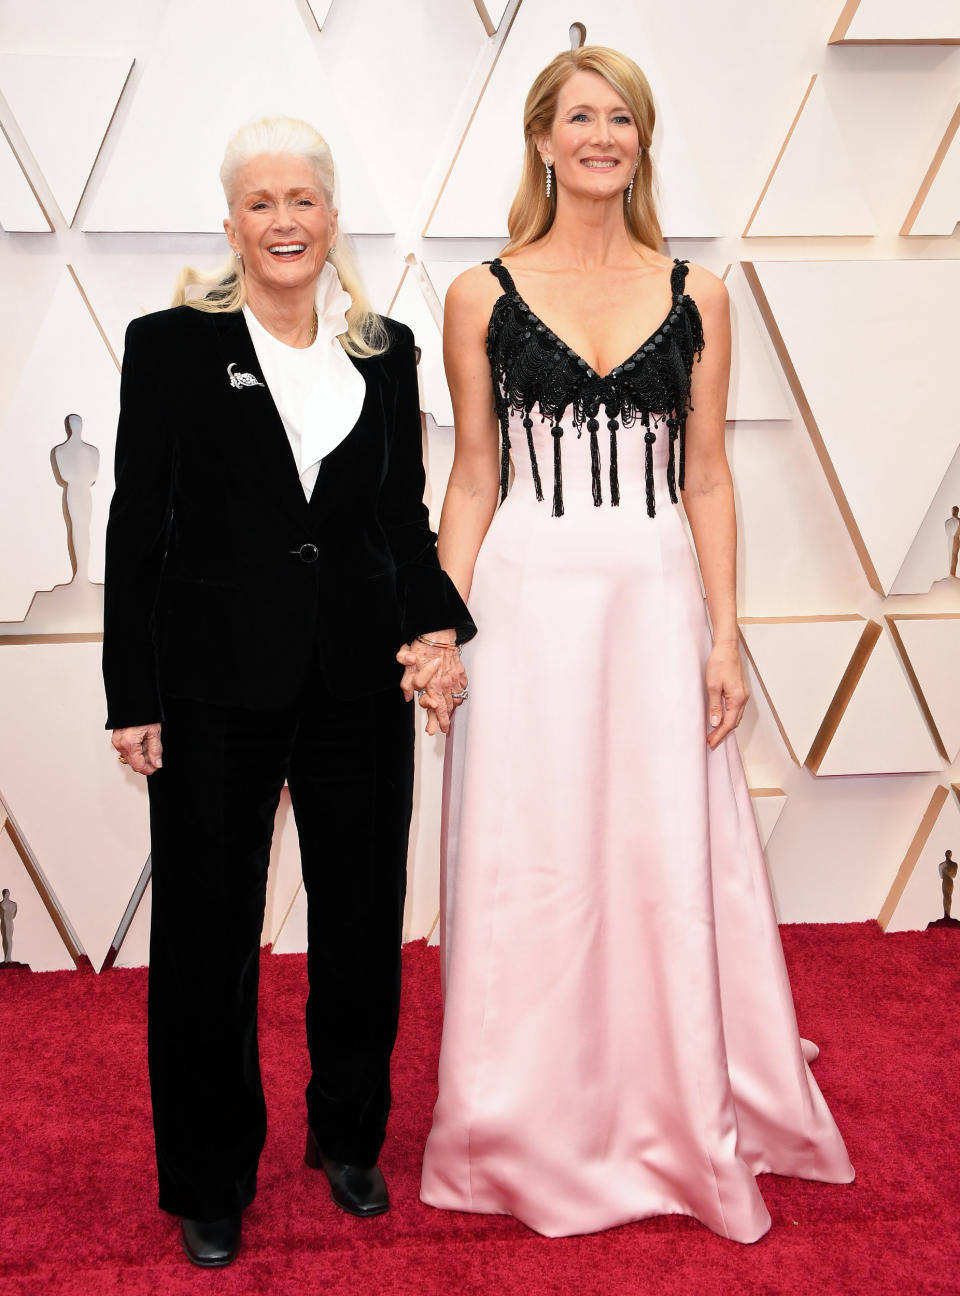 Laura Dern and mom Diane Ladd at the 92nd Oscars. (Robyn Beck / AFP via Getty Images)